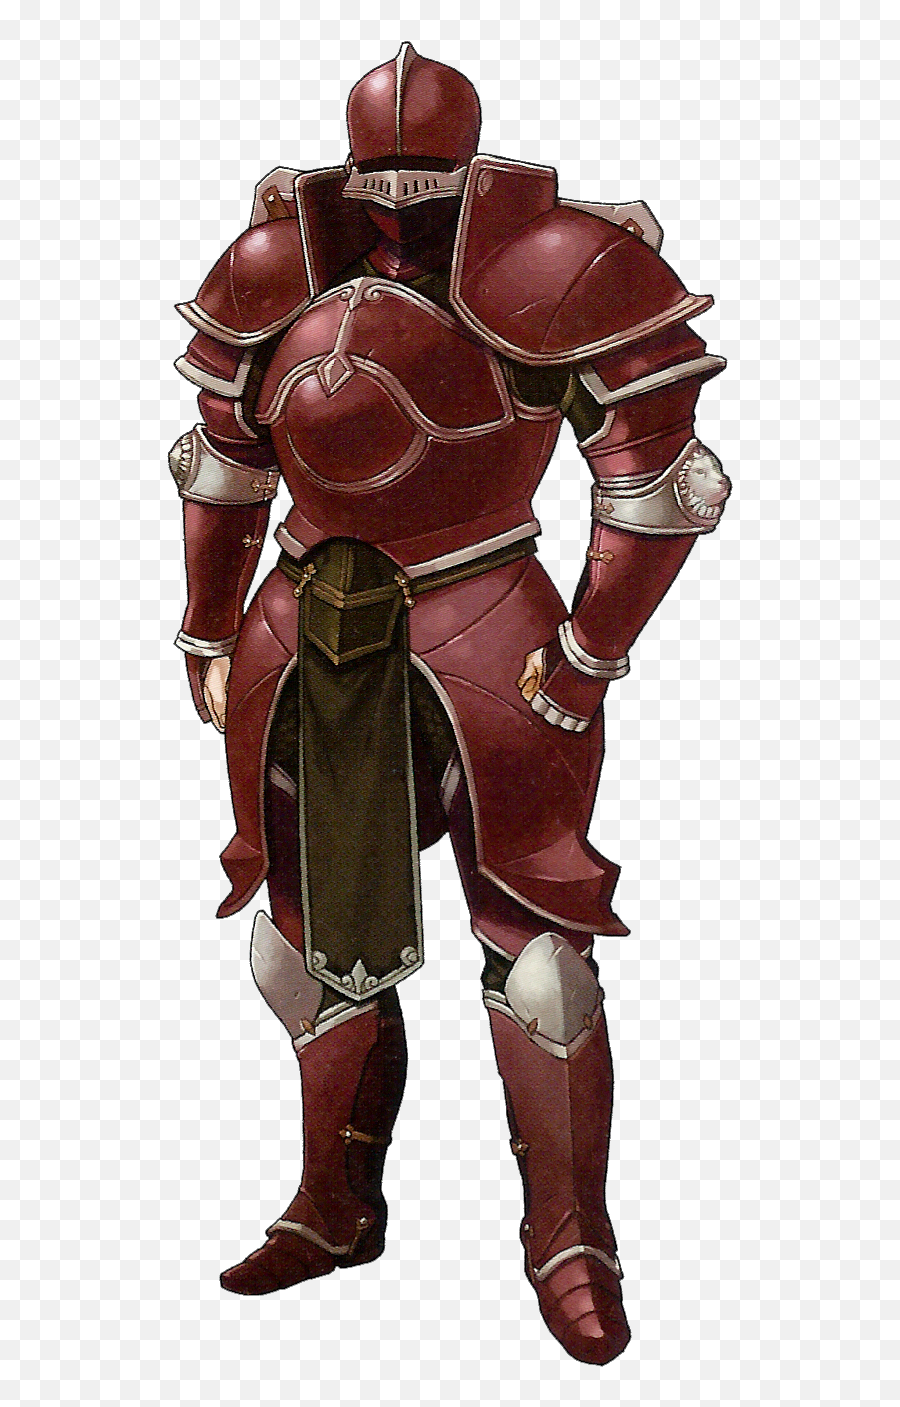 Download Fire Emblem Great Knight Png Image With No - Fire Emblem Echoes Knight Emoji,Knights Emoji